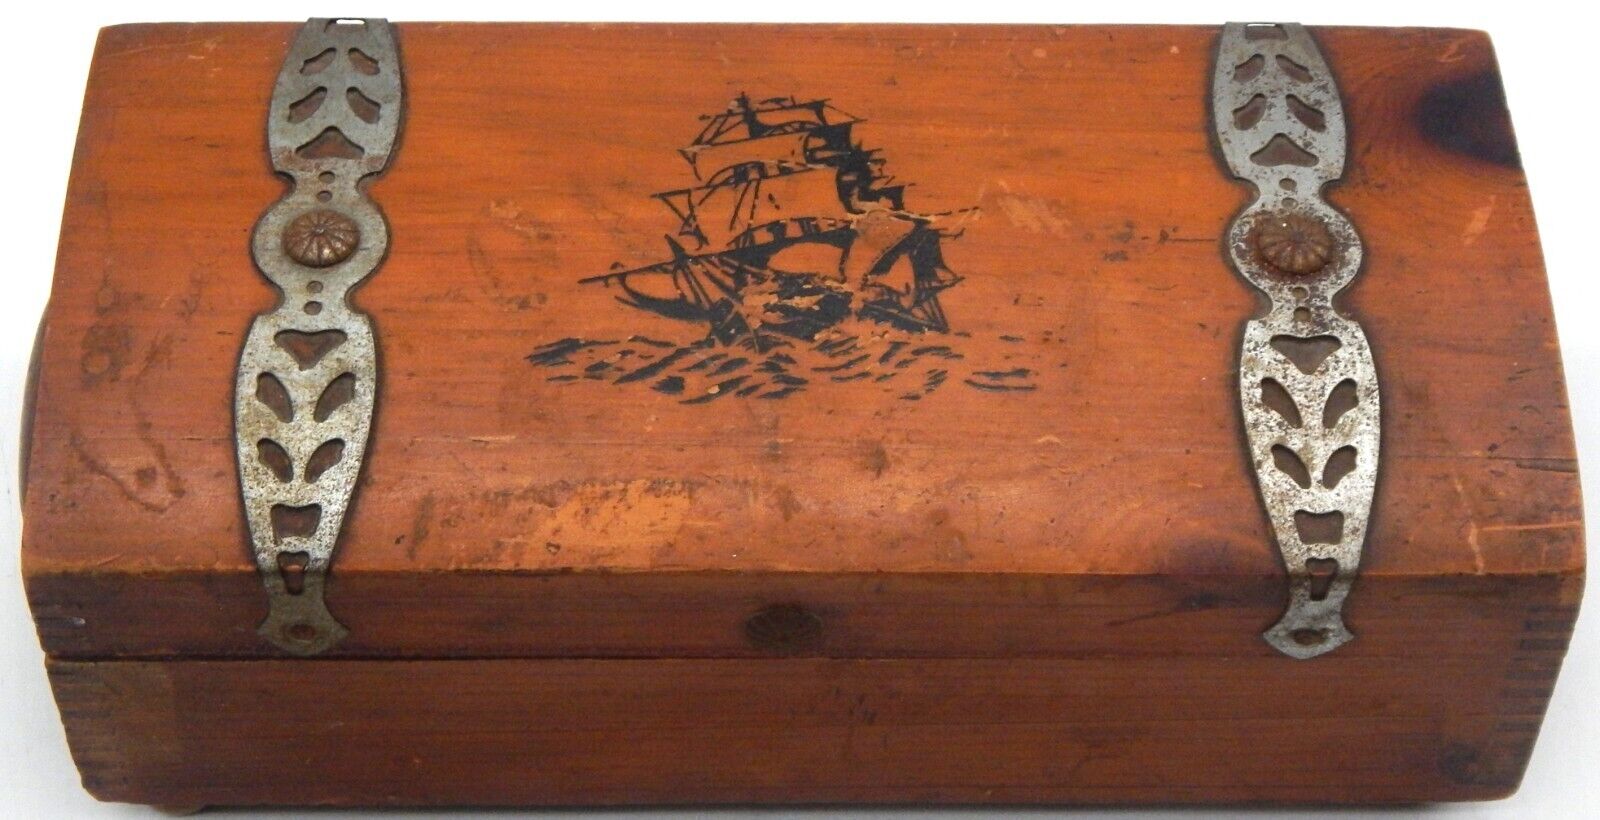 Vintage Nautical Wooden And Metal Distressed Treasure Chest With Handles & Feet